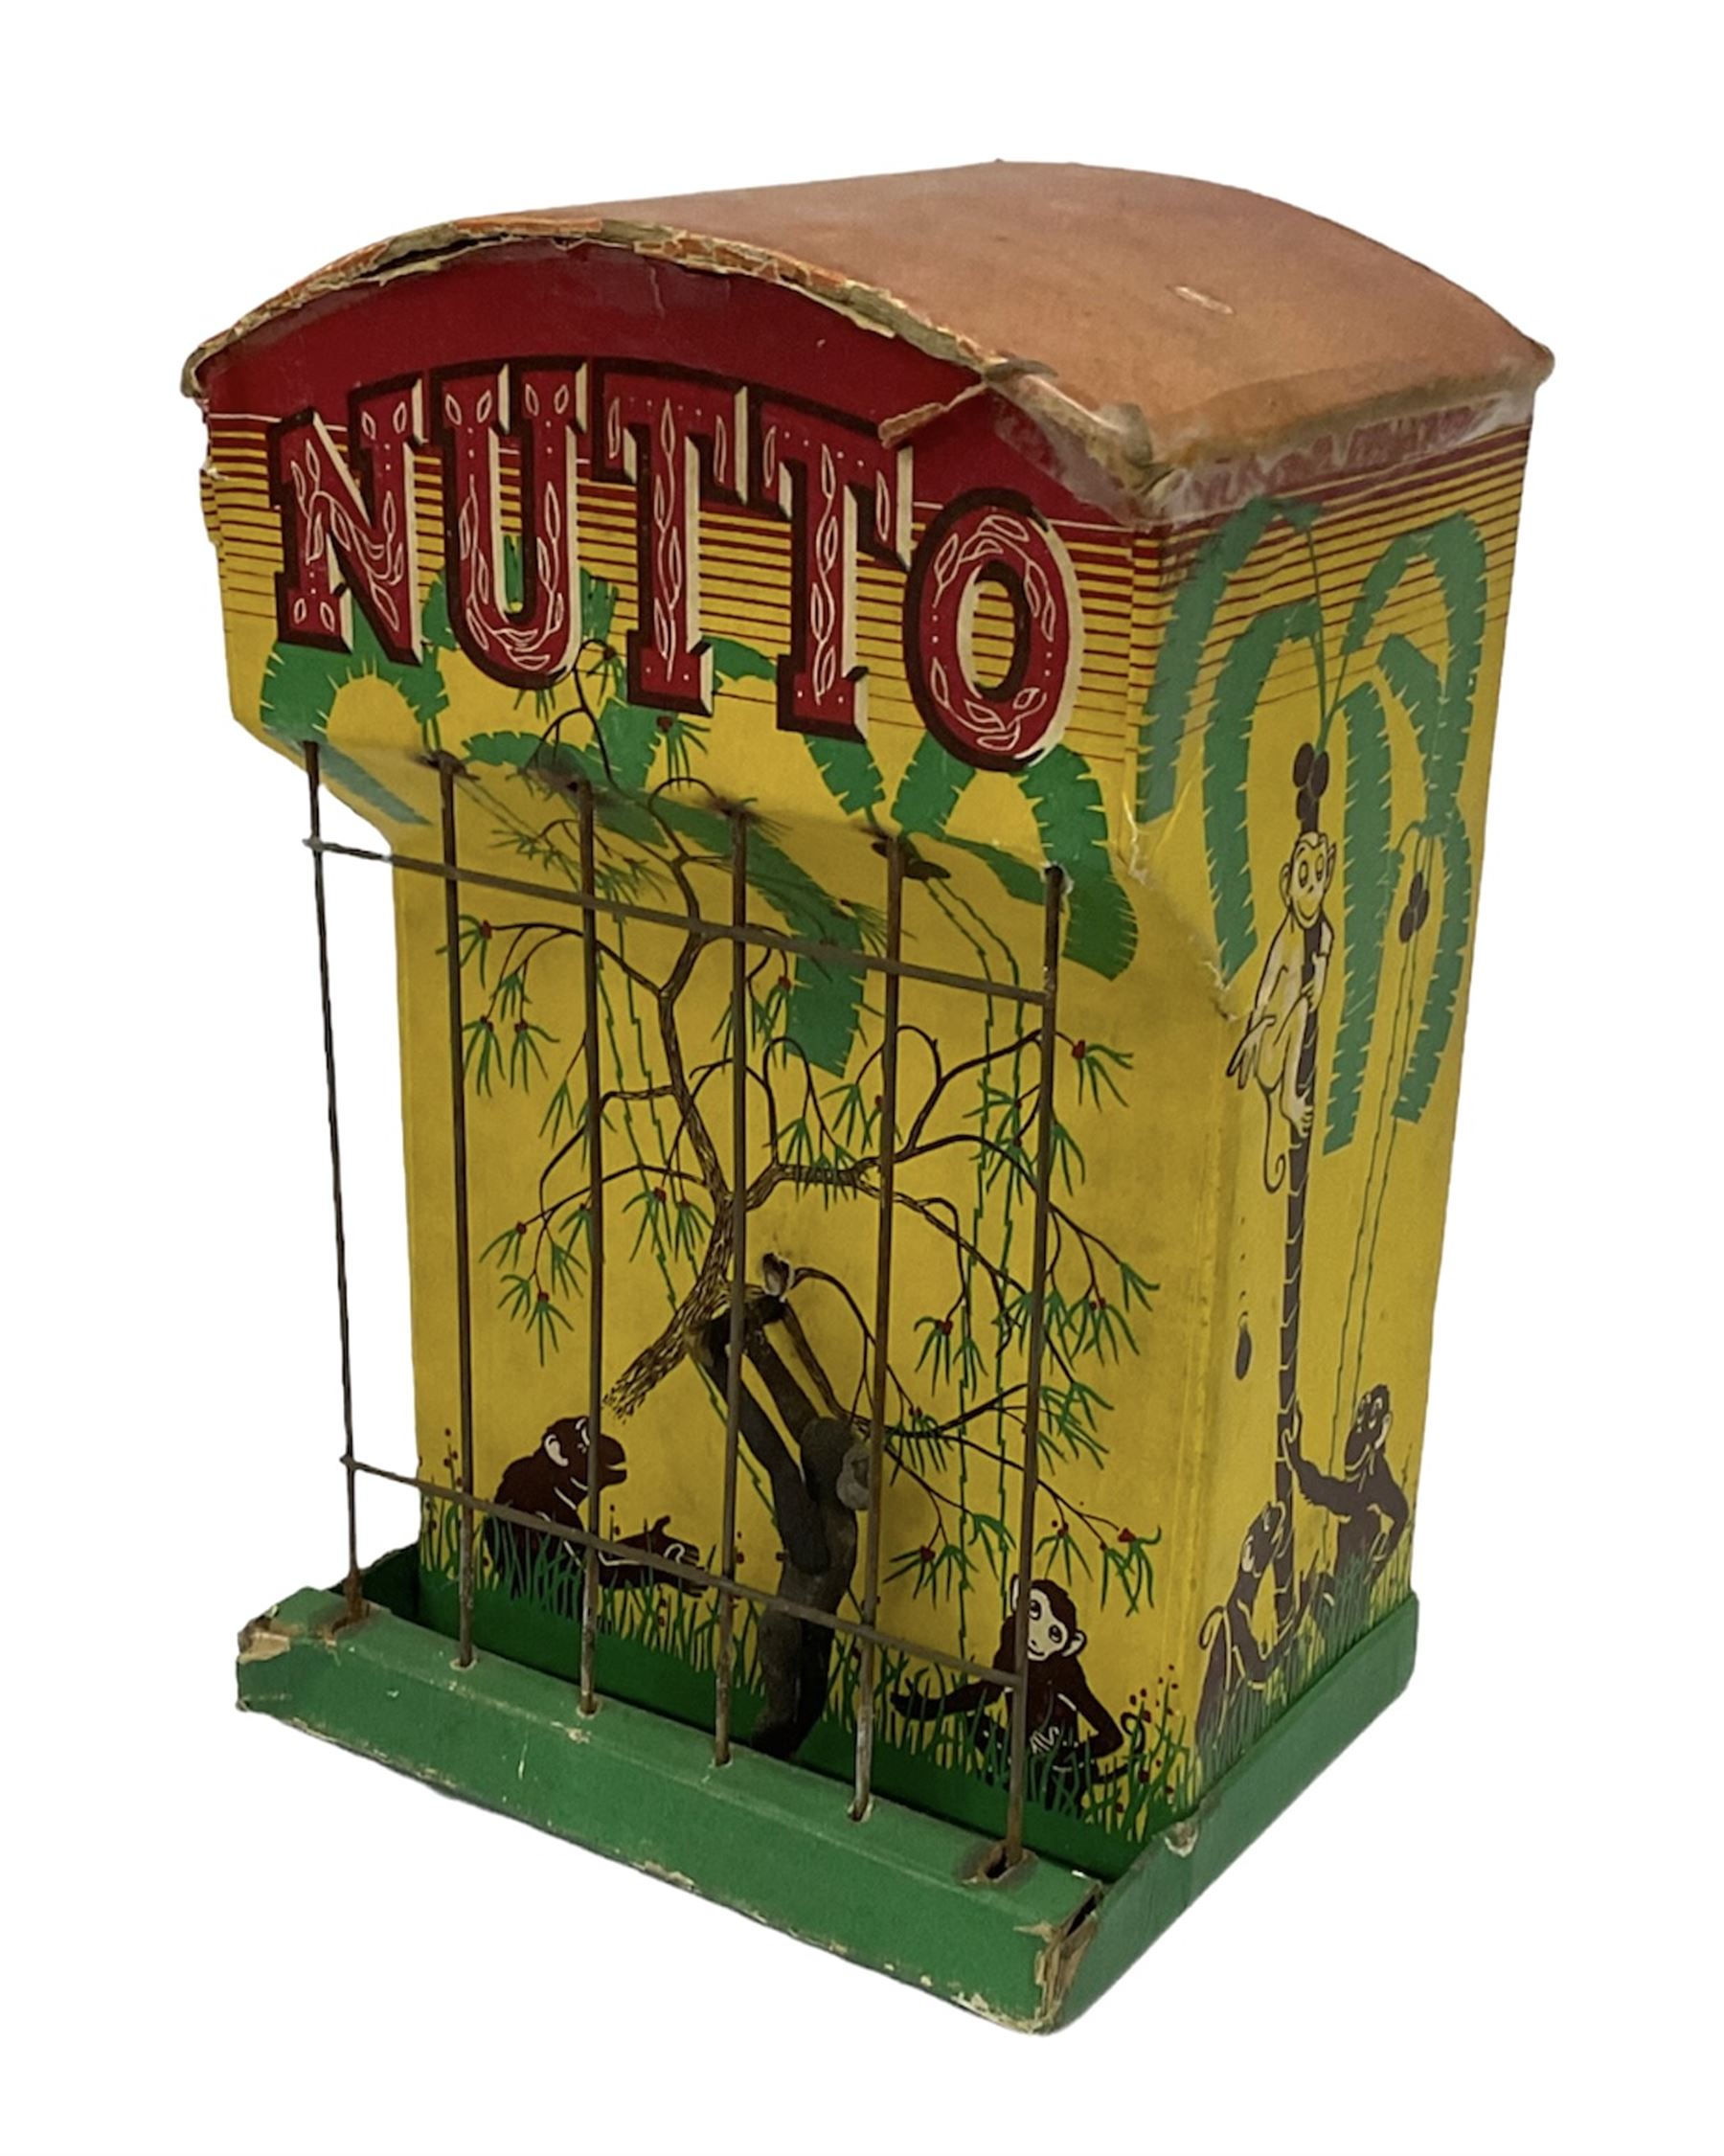 'Nutto' Sand automation acrobatic monkey performing in a cage toy